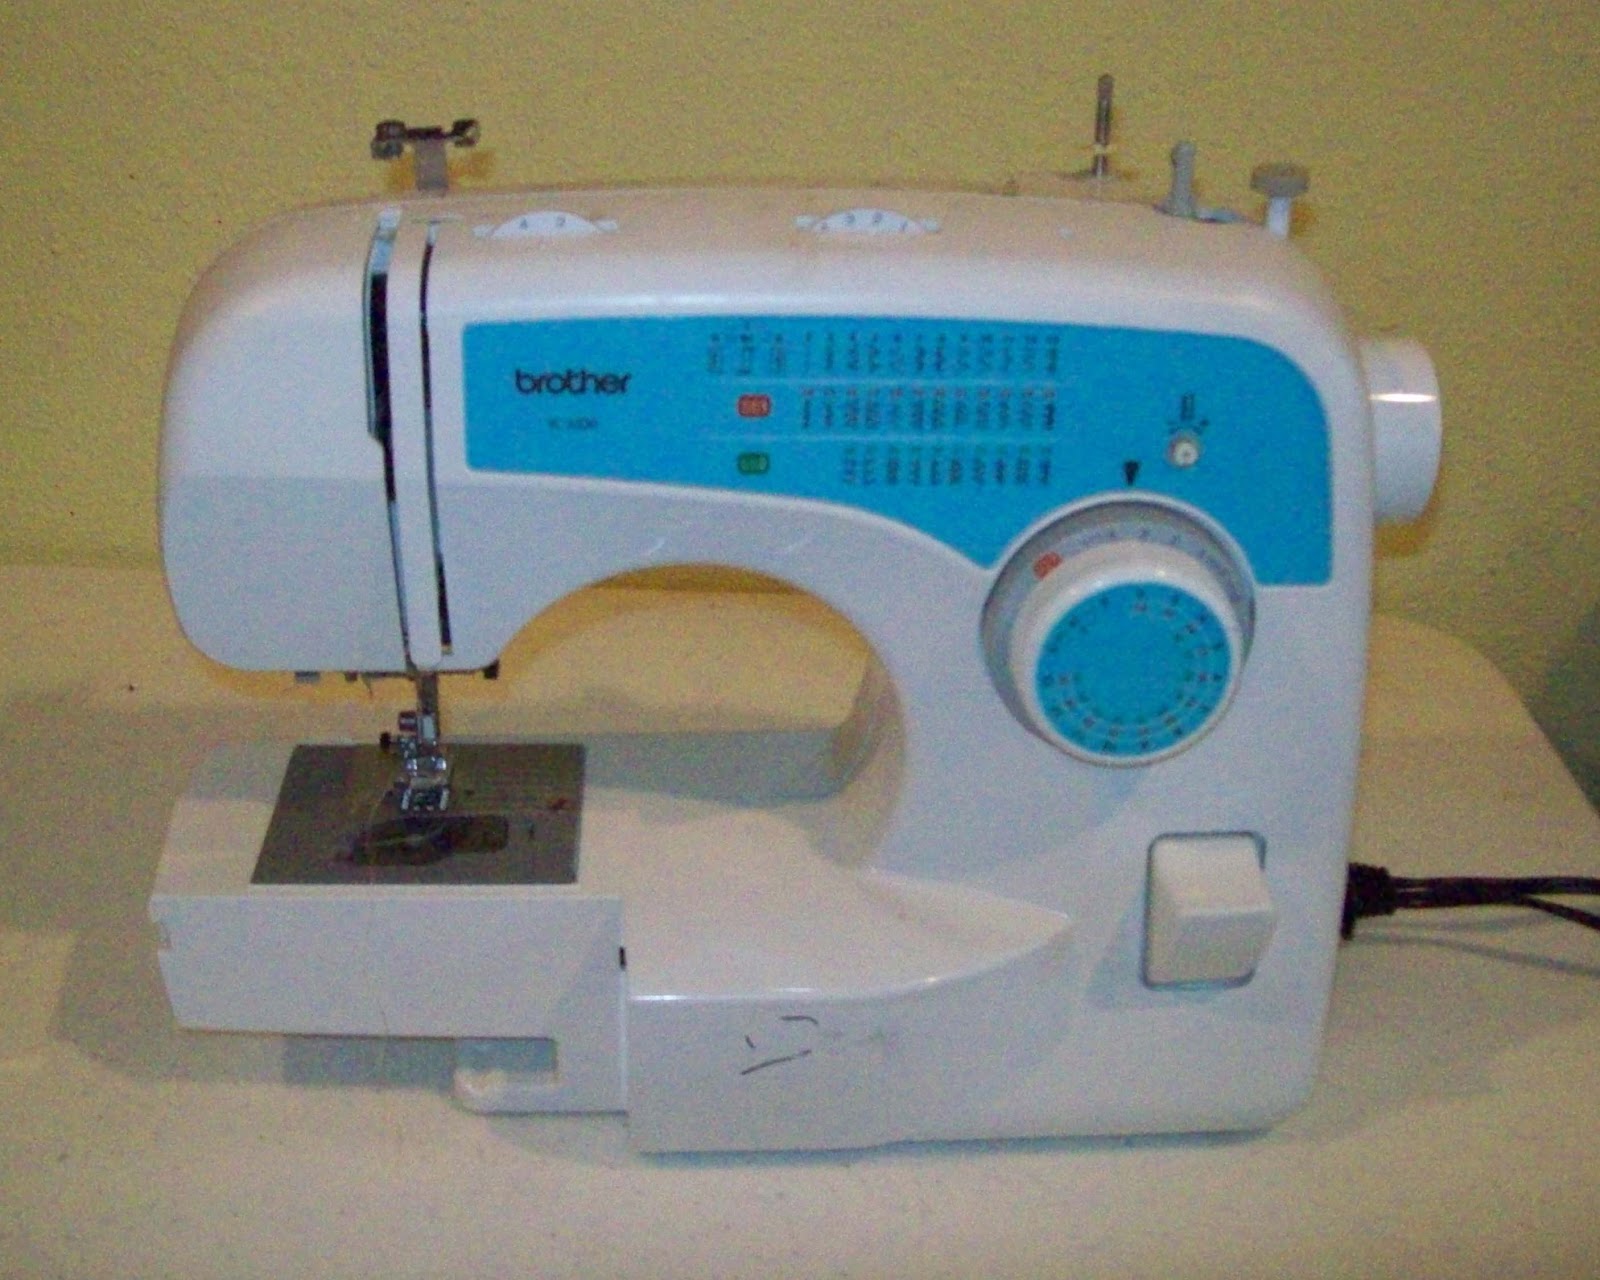 CT Studios: Brother XL3500 Sewing Machine and Continued Quilt Practice